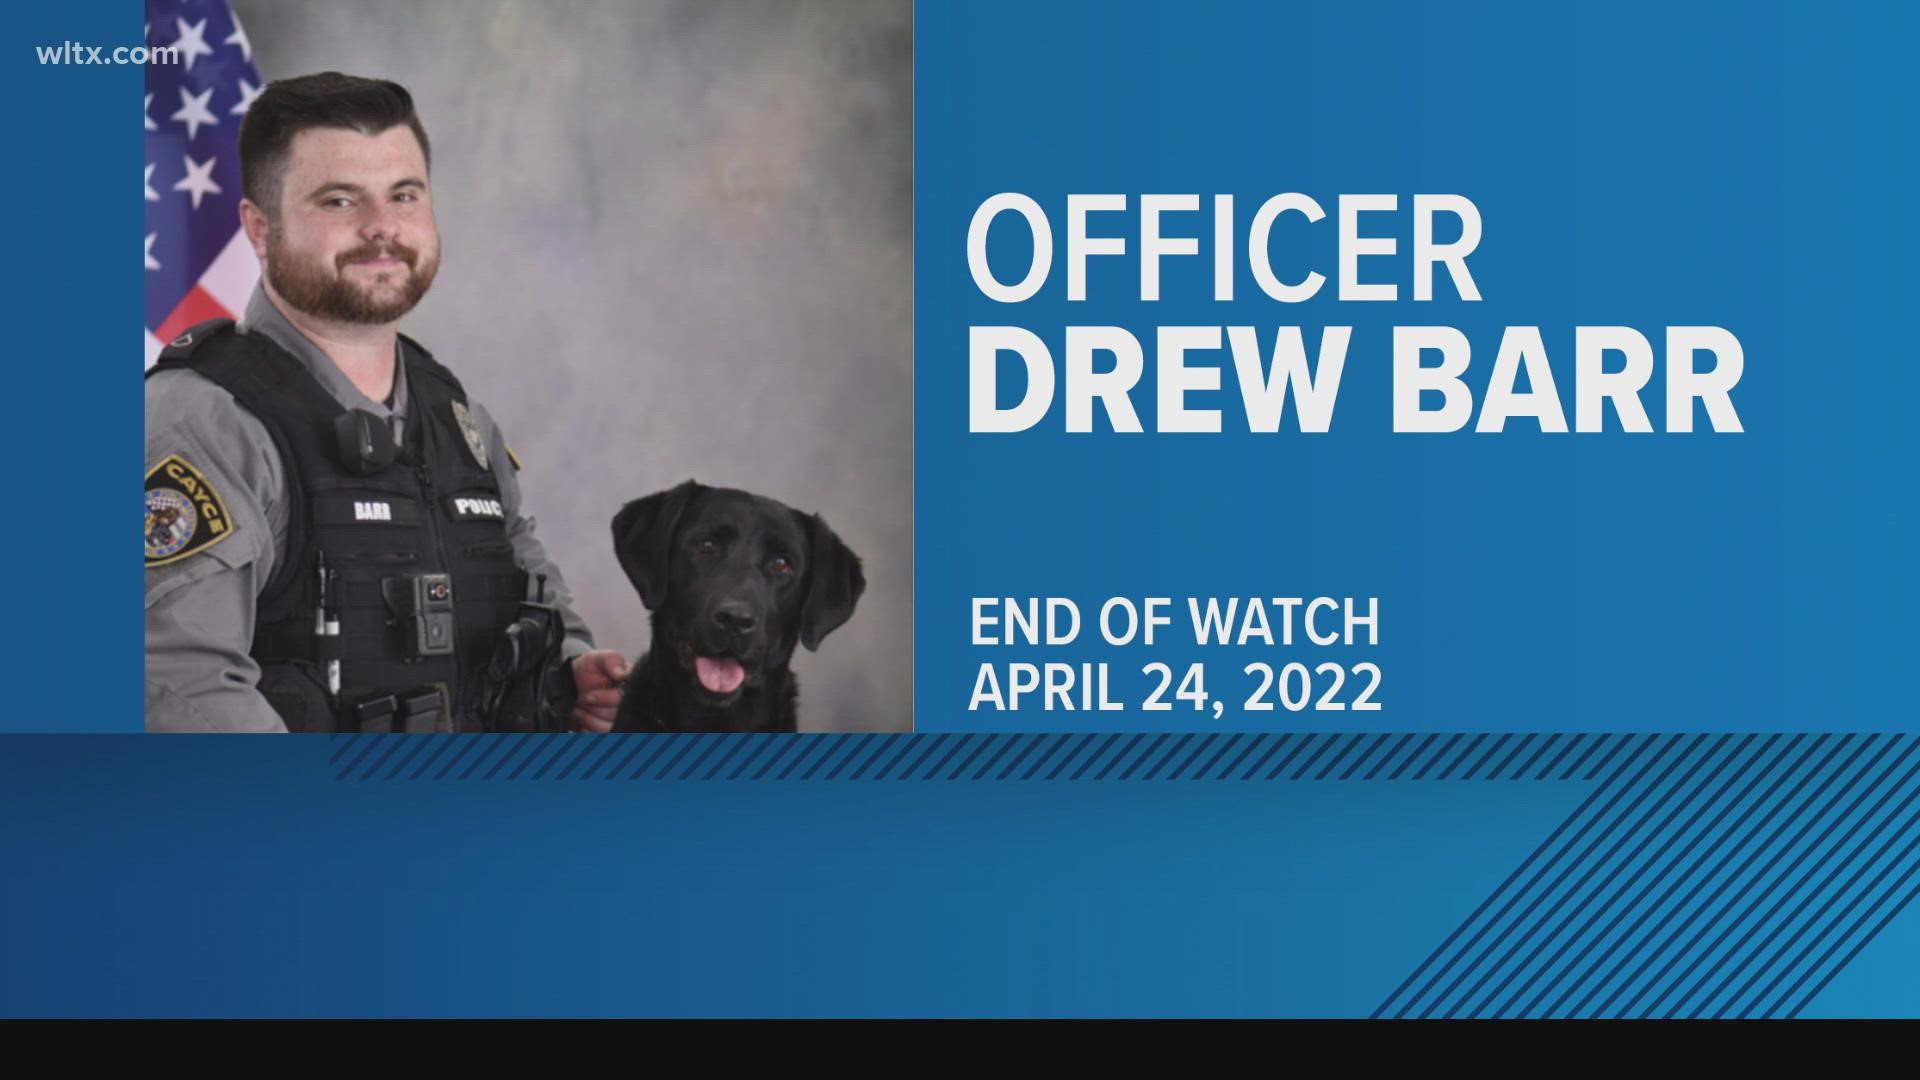 Cayce Public Safety Officer Drew Barr was shot and killed in the line of duty Sunday morning, April 24, 2022